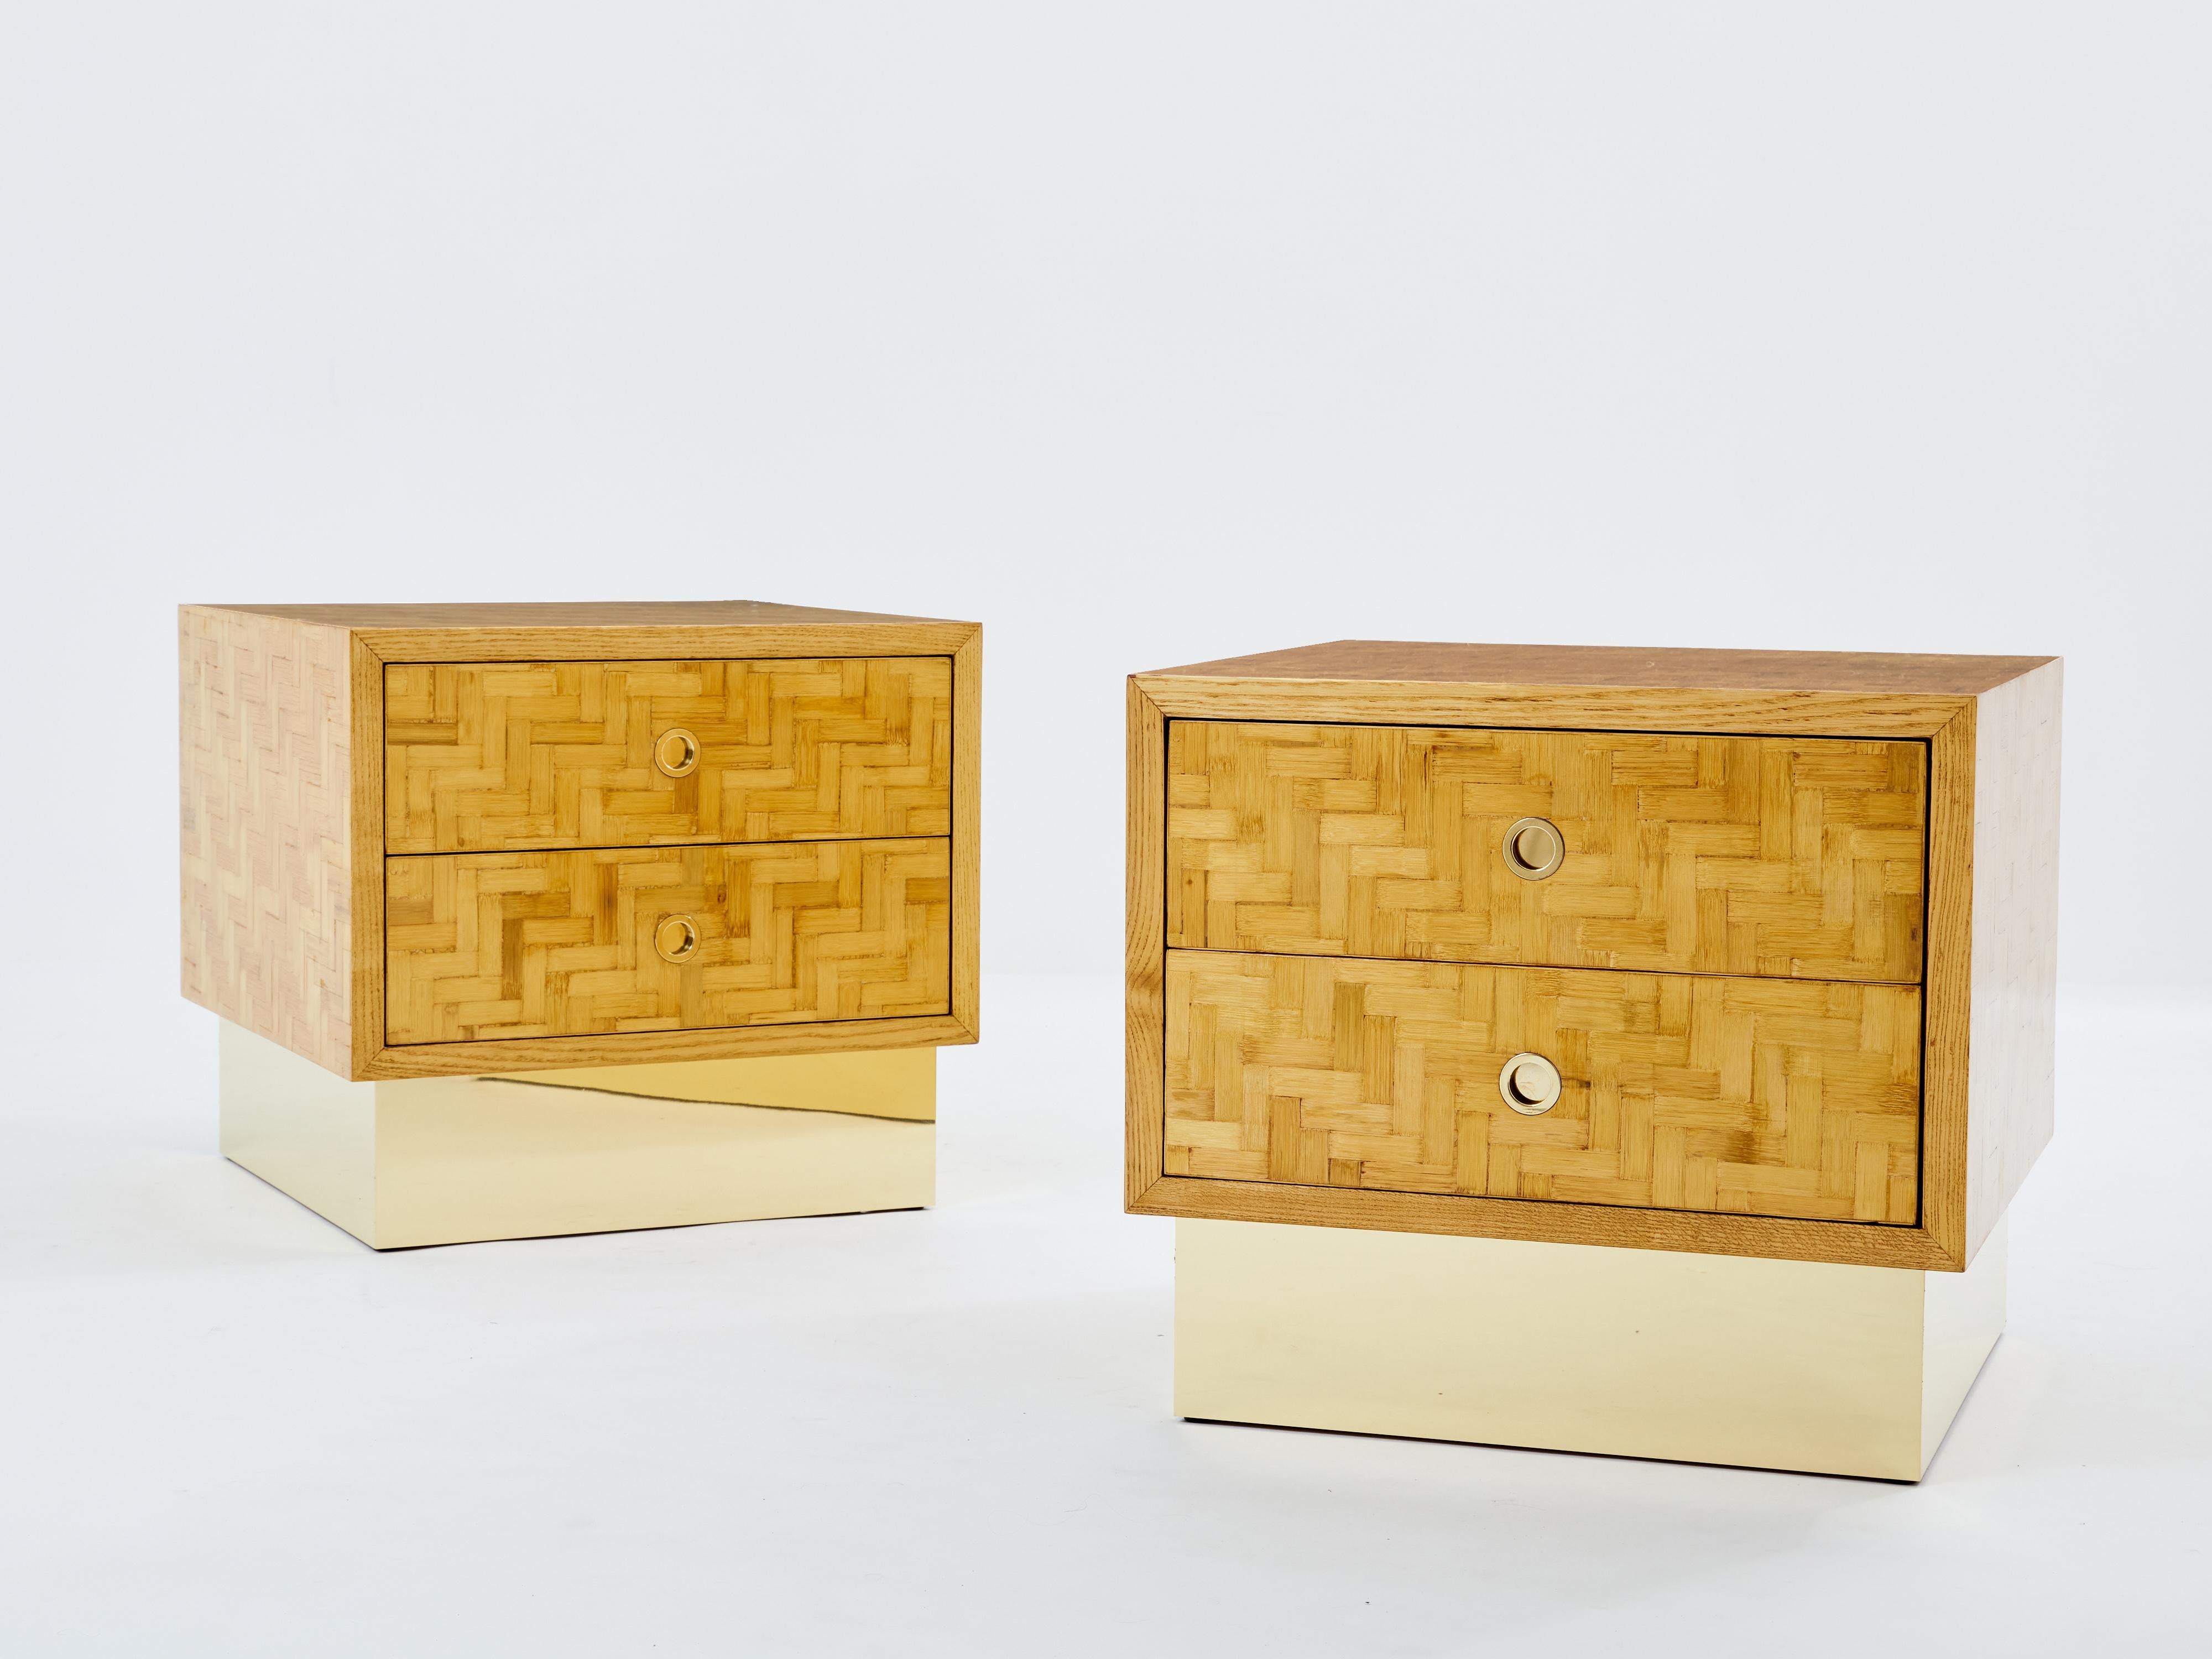 Natural bamboo as the chief material, the patterned marquetry creates a beautiful symmetry, with an organic aesthetic in this 1970’s pair of Dal Vera bedside tables, while bright brass handles and base are strong eye-catching touches. The brass